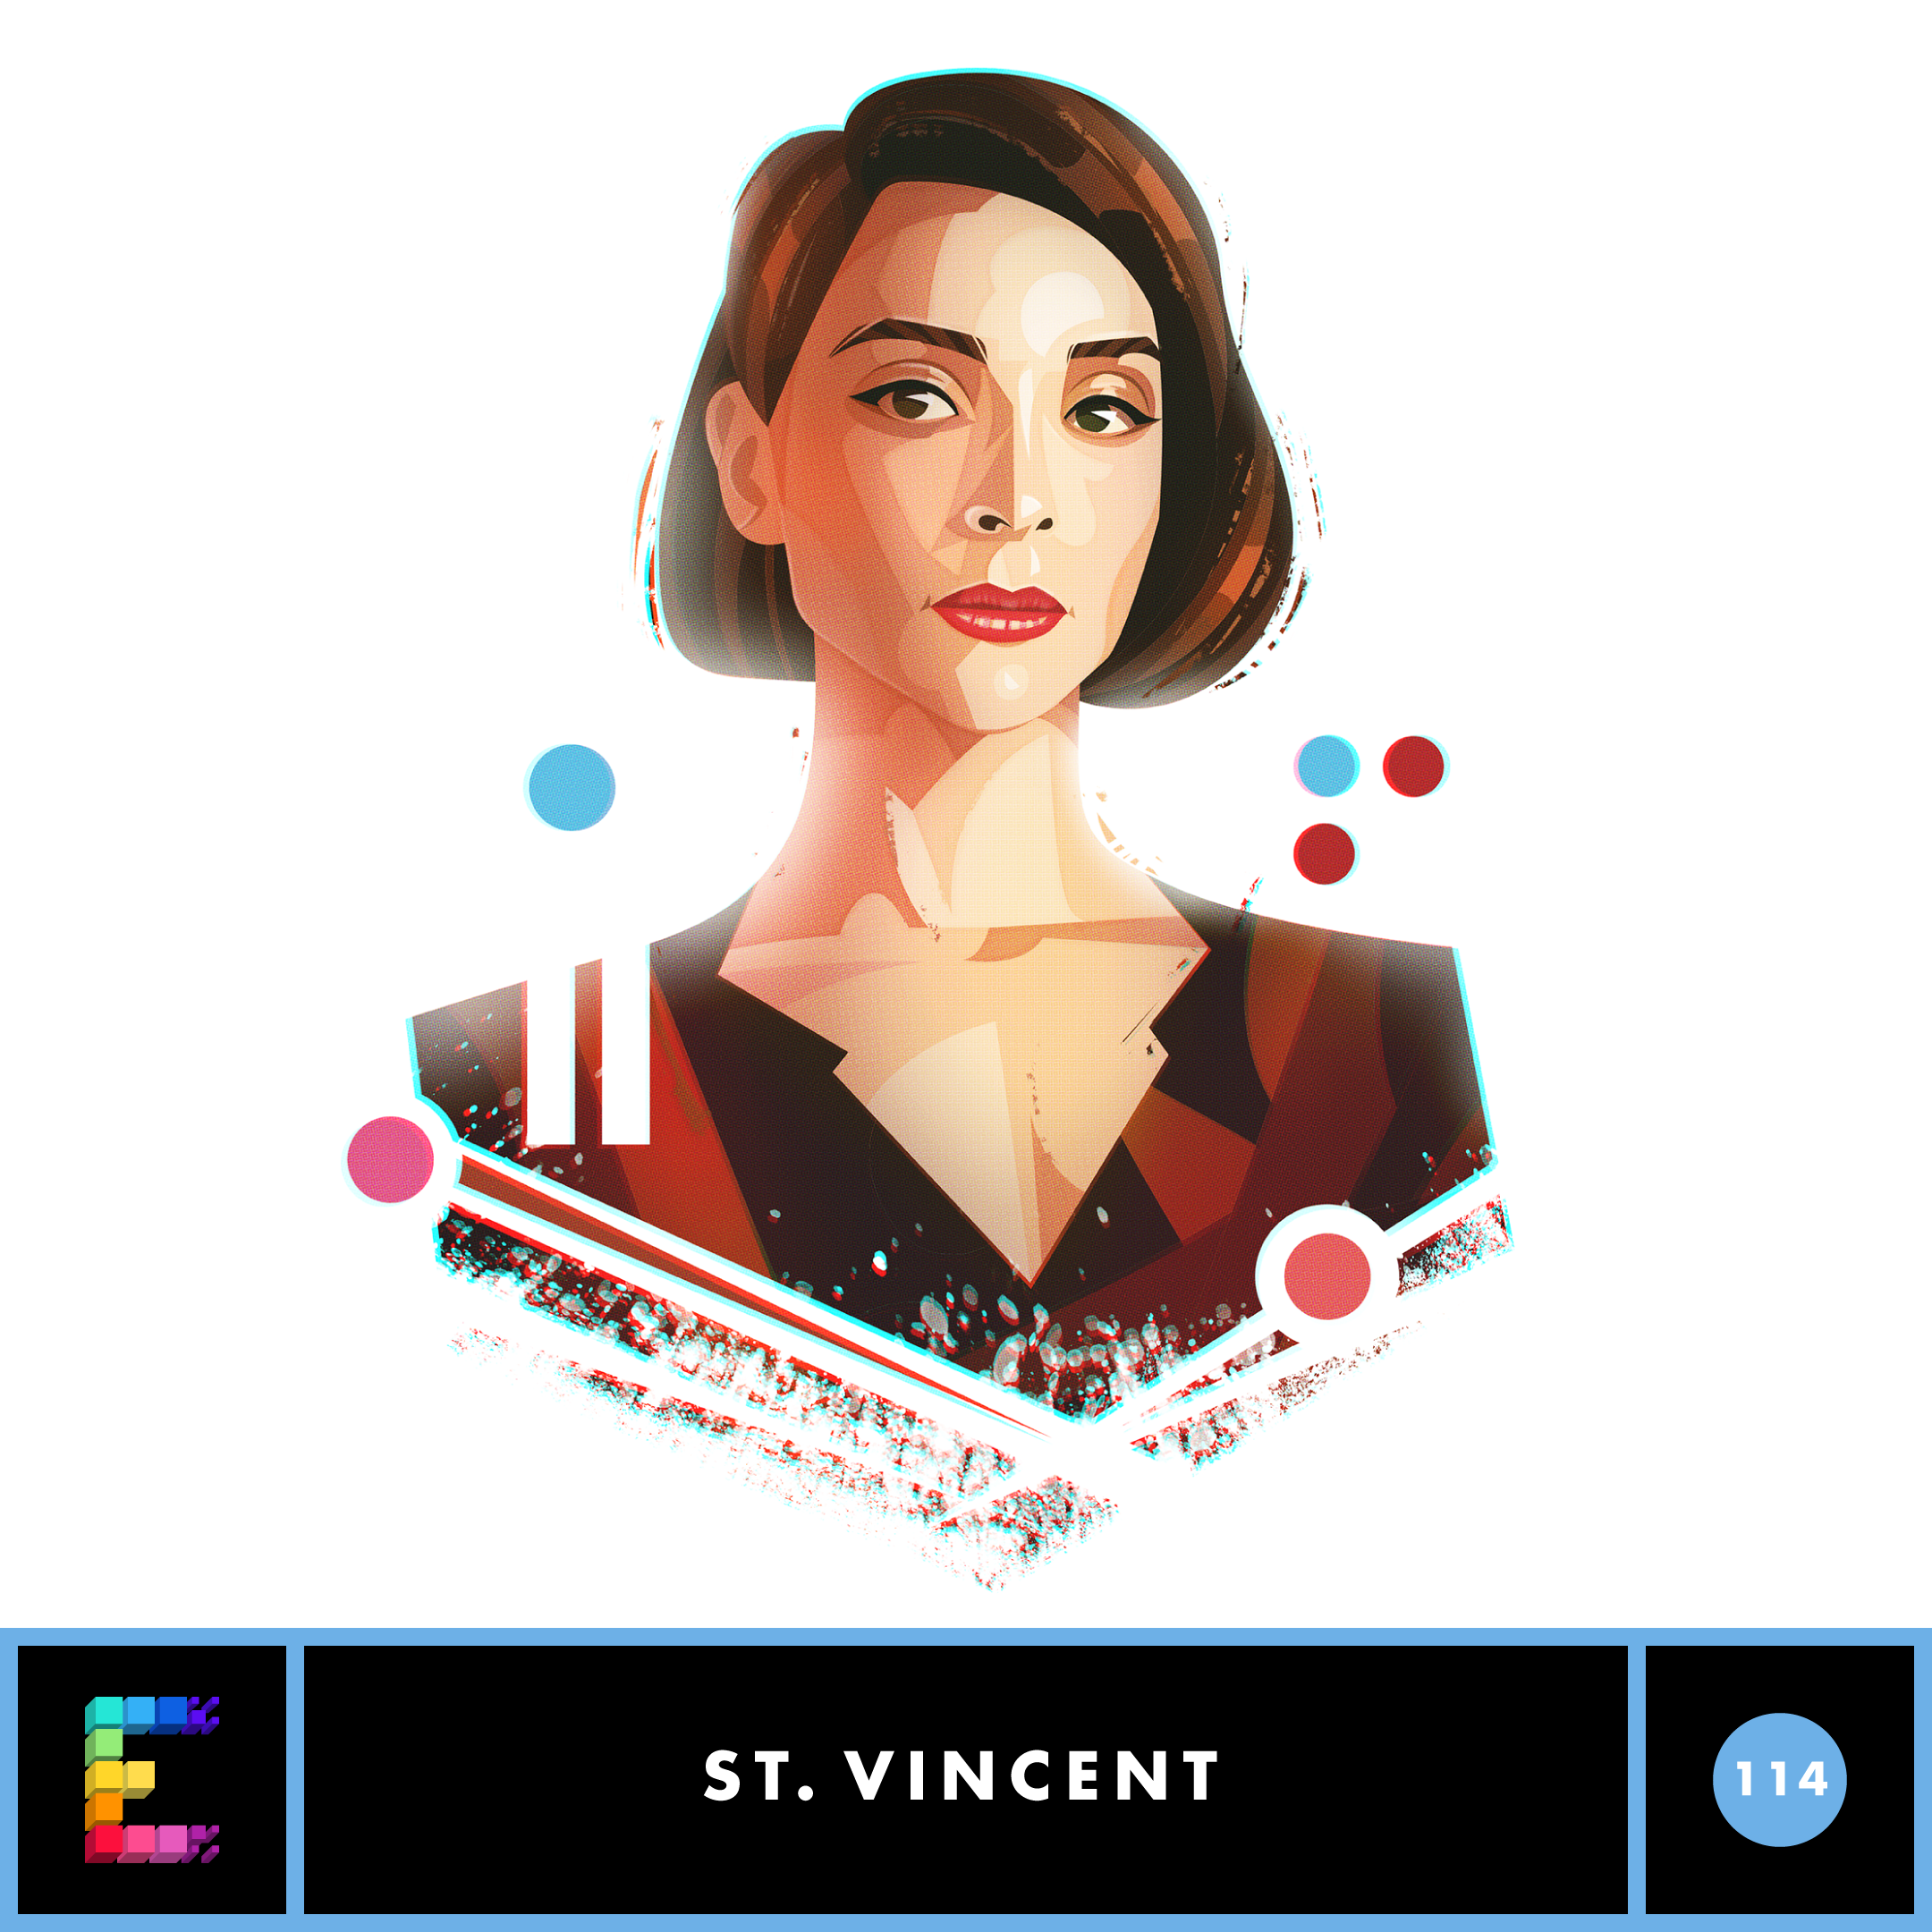 St Vincent’s Embarrassing First Voice Memo Demo